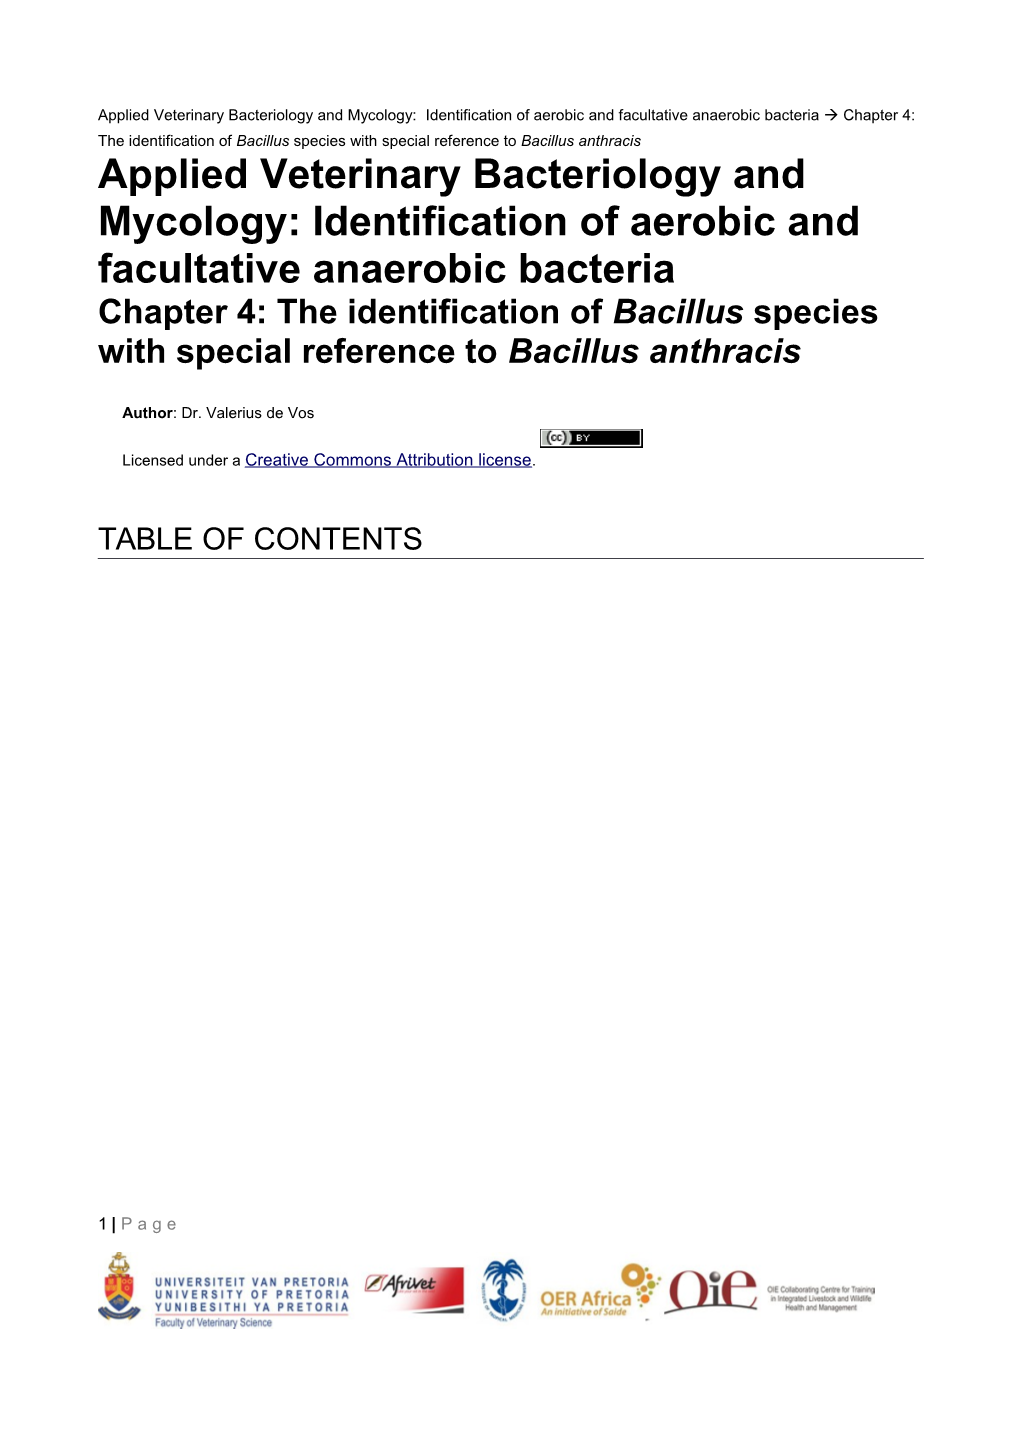 Chapter 4: the Identification of Bacillus Species with Special Reference to Bacillus Anthracis